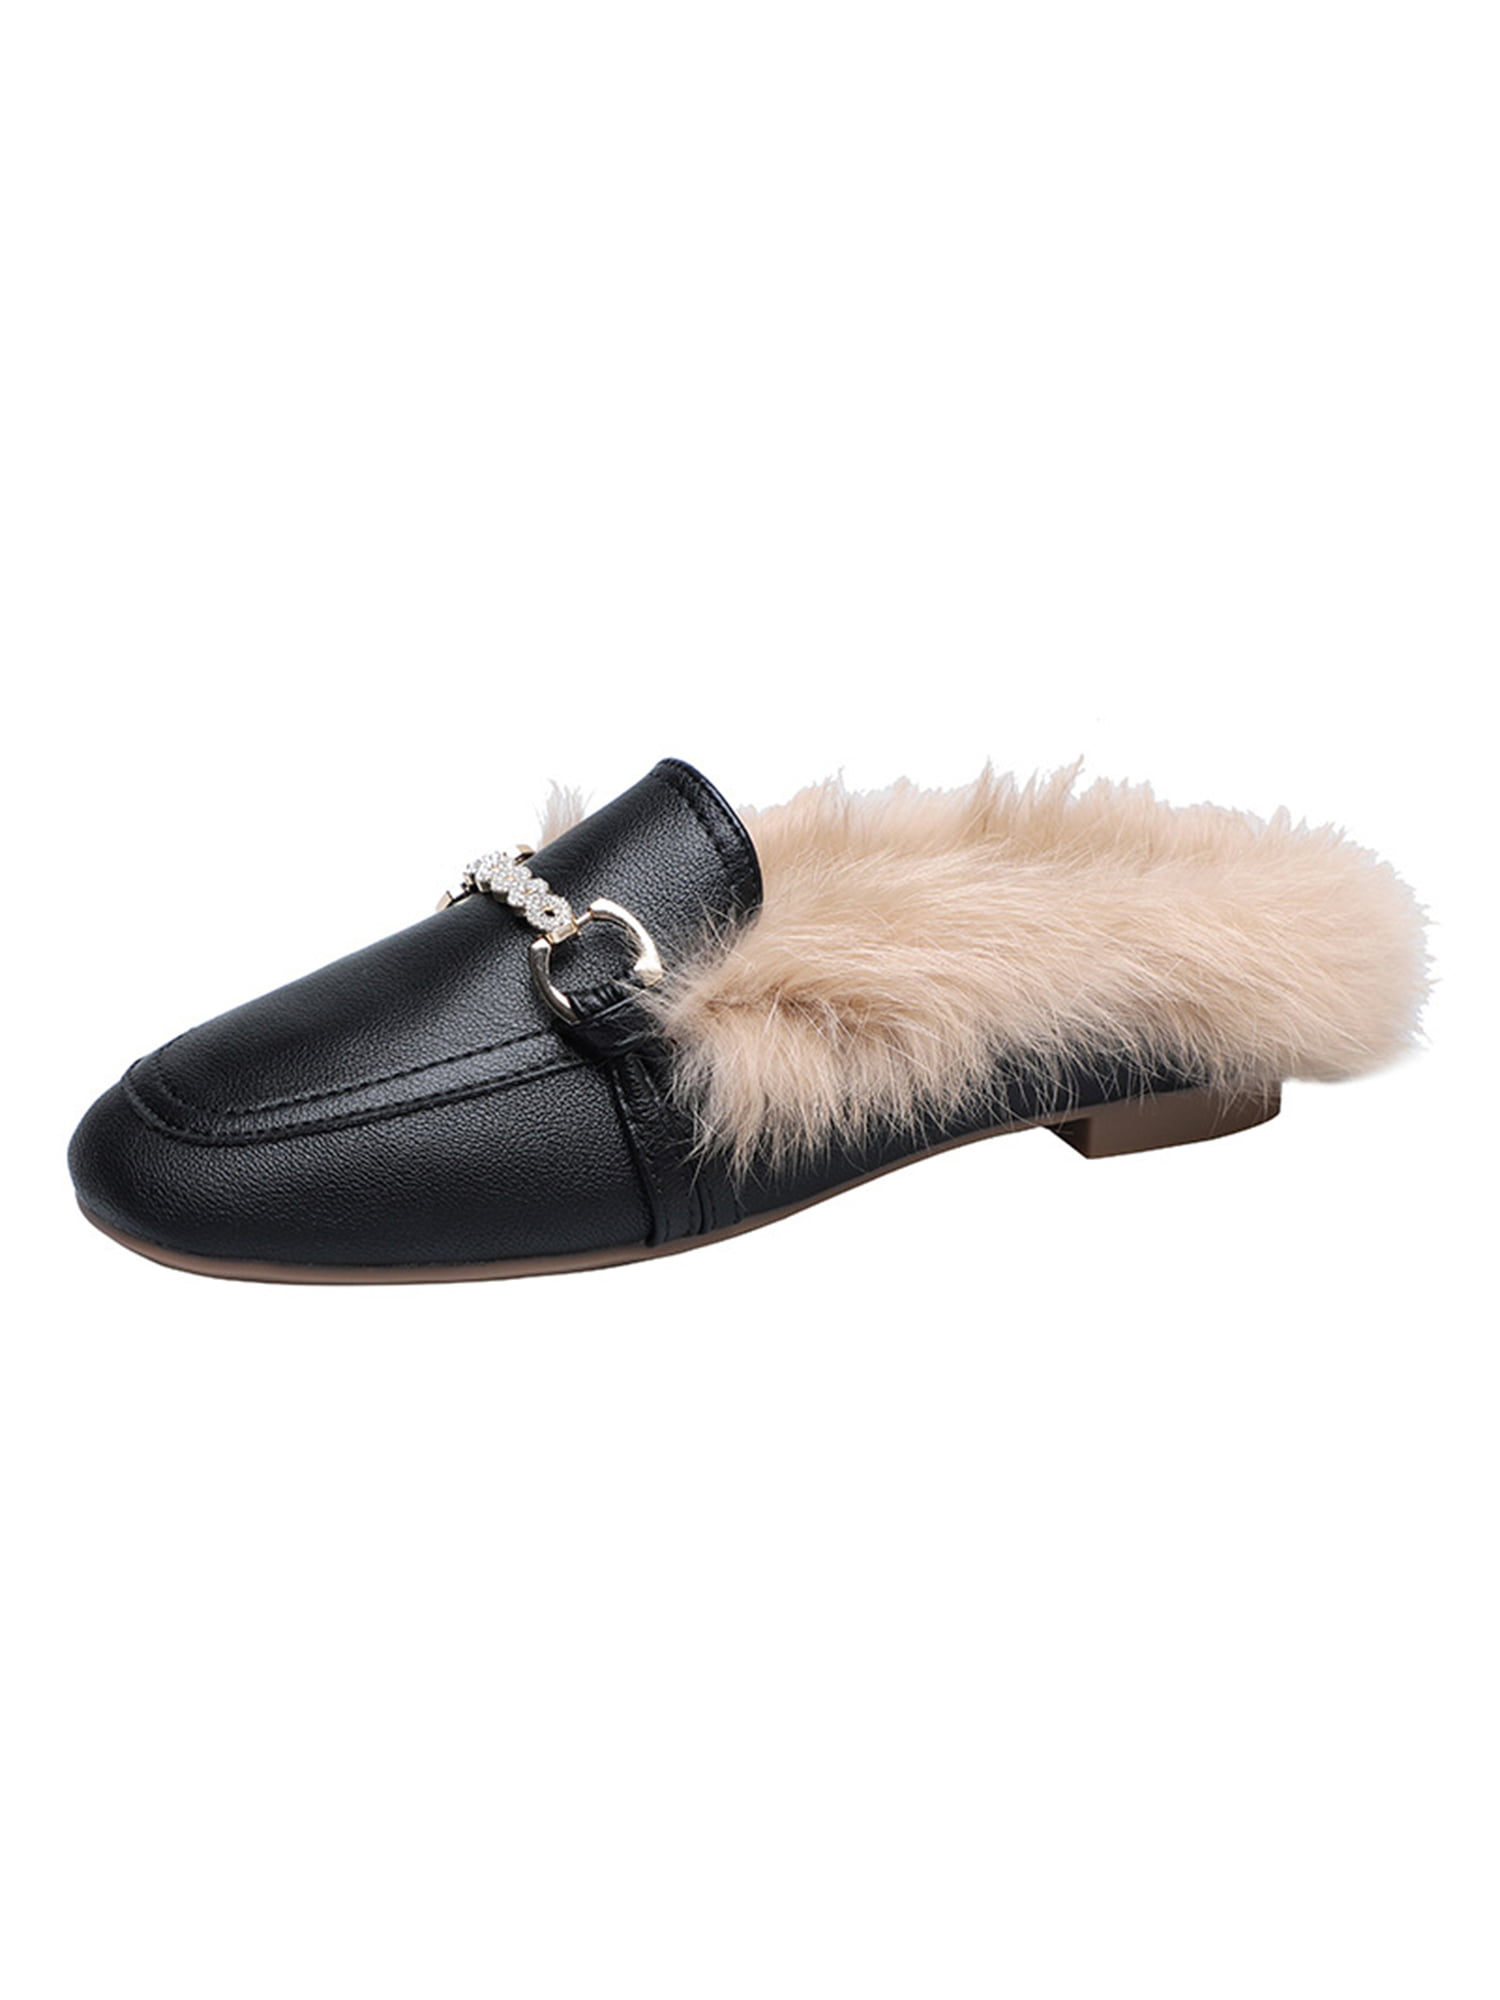 Women Rabbit Fur soft Flat Slip On Lined Mule Loafers Backless Slipers Shoes 